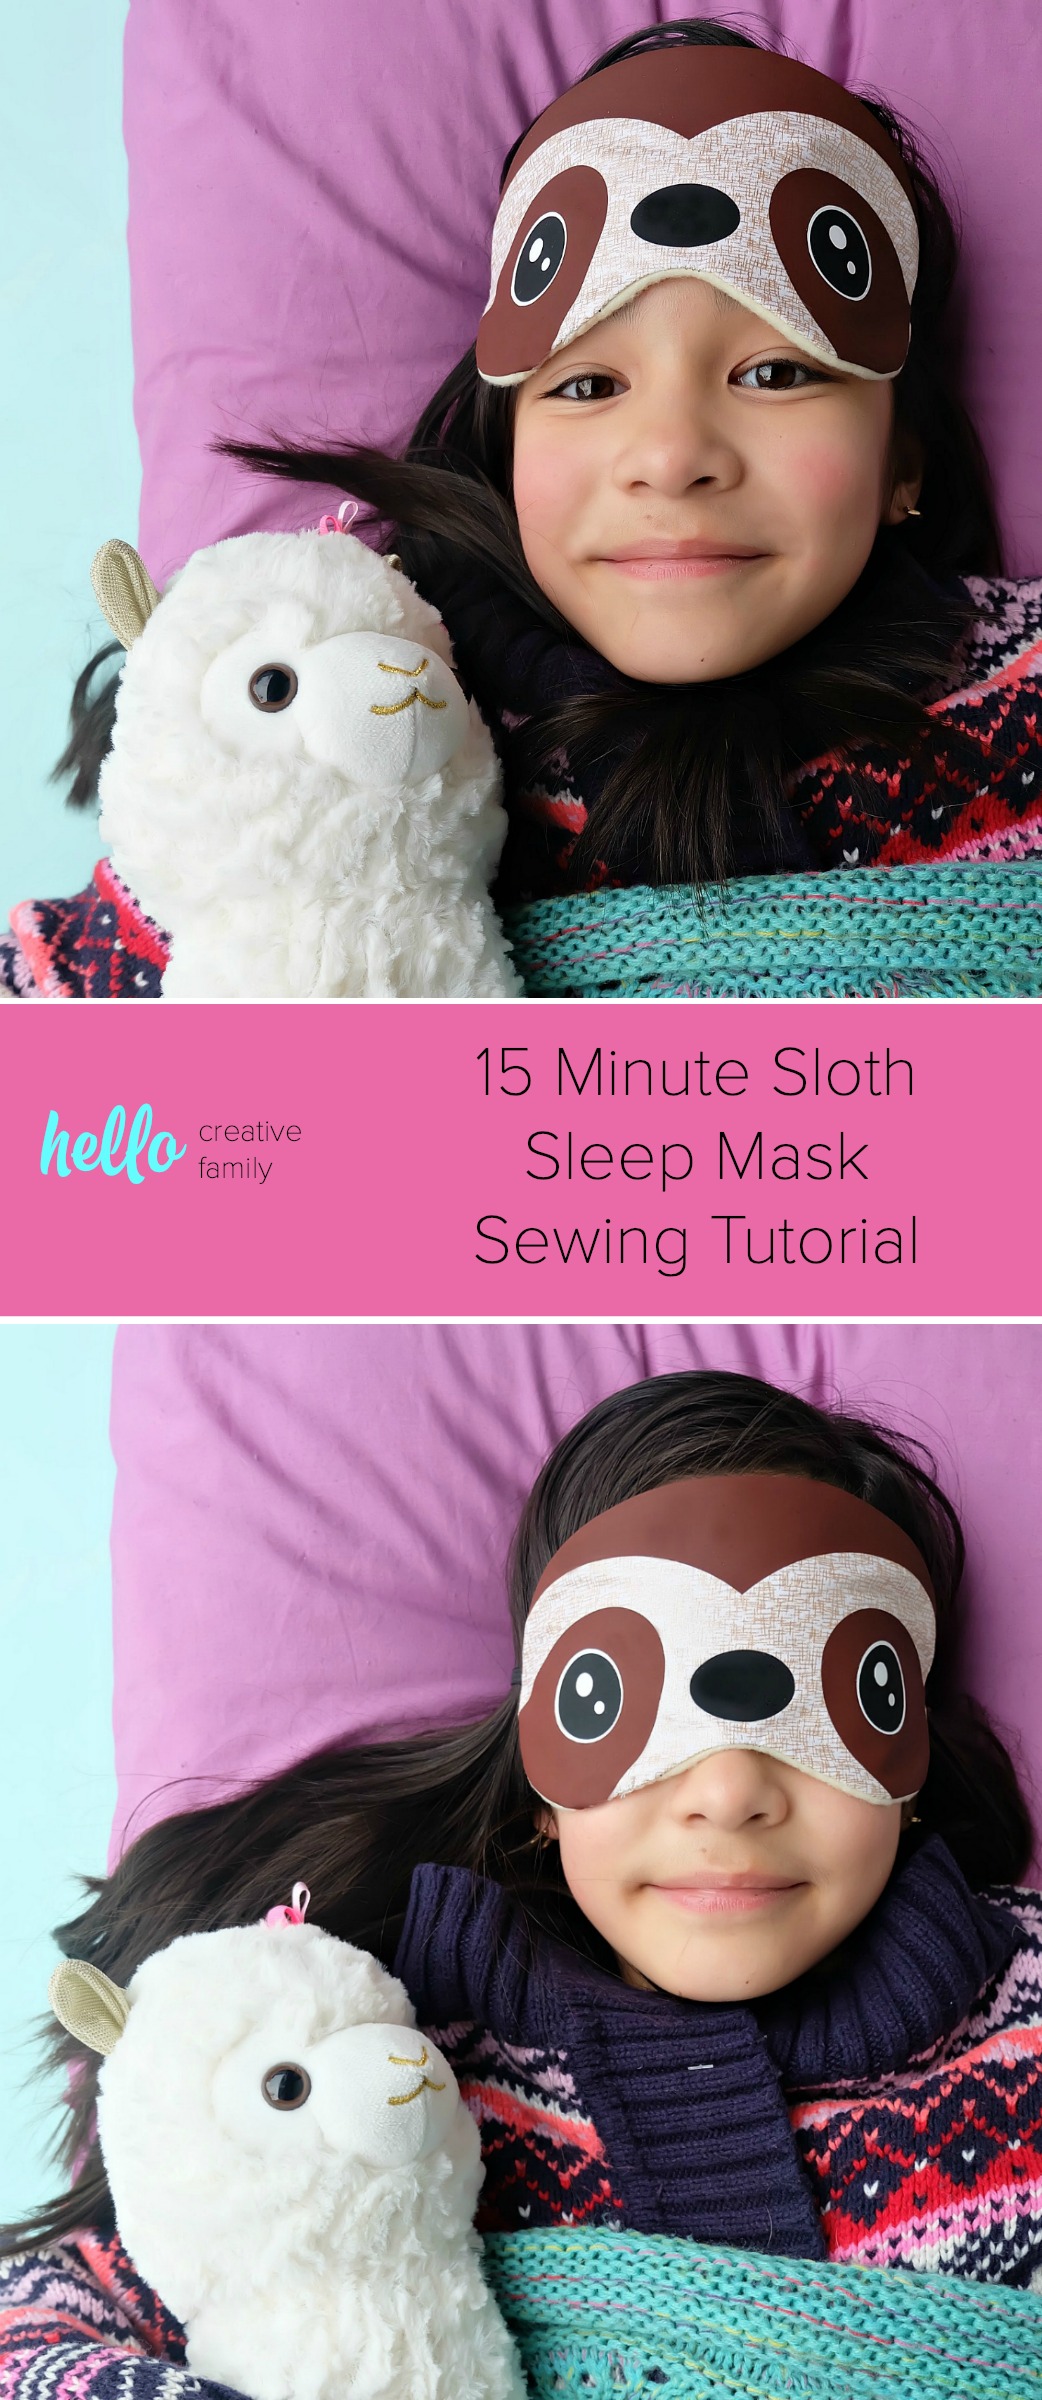 This might be the most fun Cricut Maker project ever! How adorable is this DIY Sloth Sleep Mask? This easy project only takes 15 minutes to make. Includes a step by step tutorial and cut file for cutting with your Cricut Maker or Cricut Explore! Would make adorable party favors for a sloth birthday slumber party! #Cricut #Sloth #Sewing #Craft